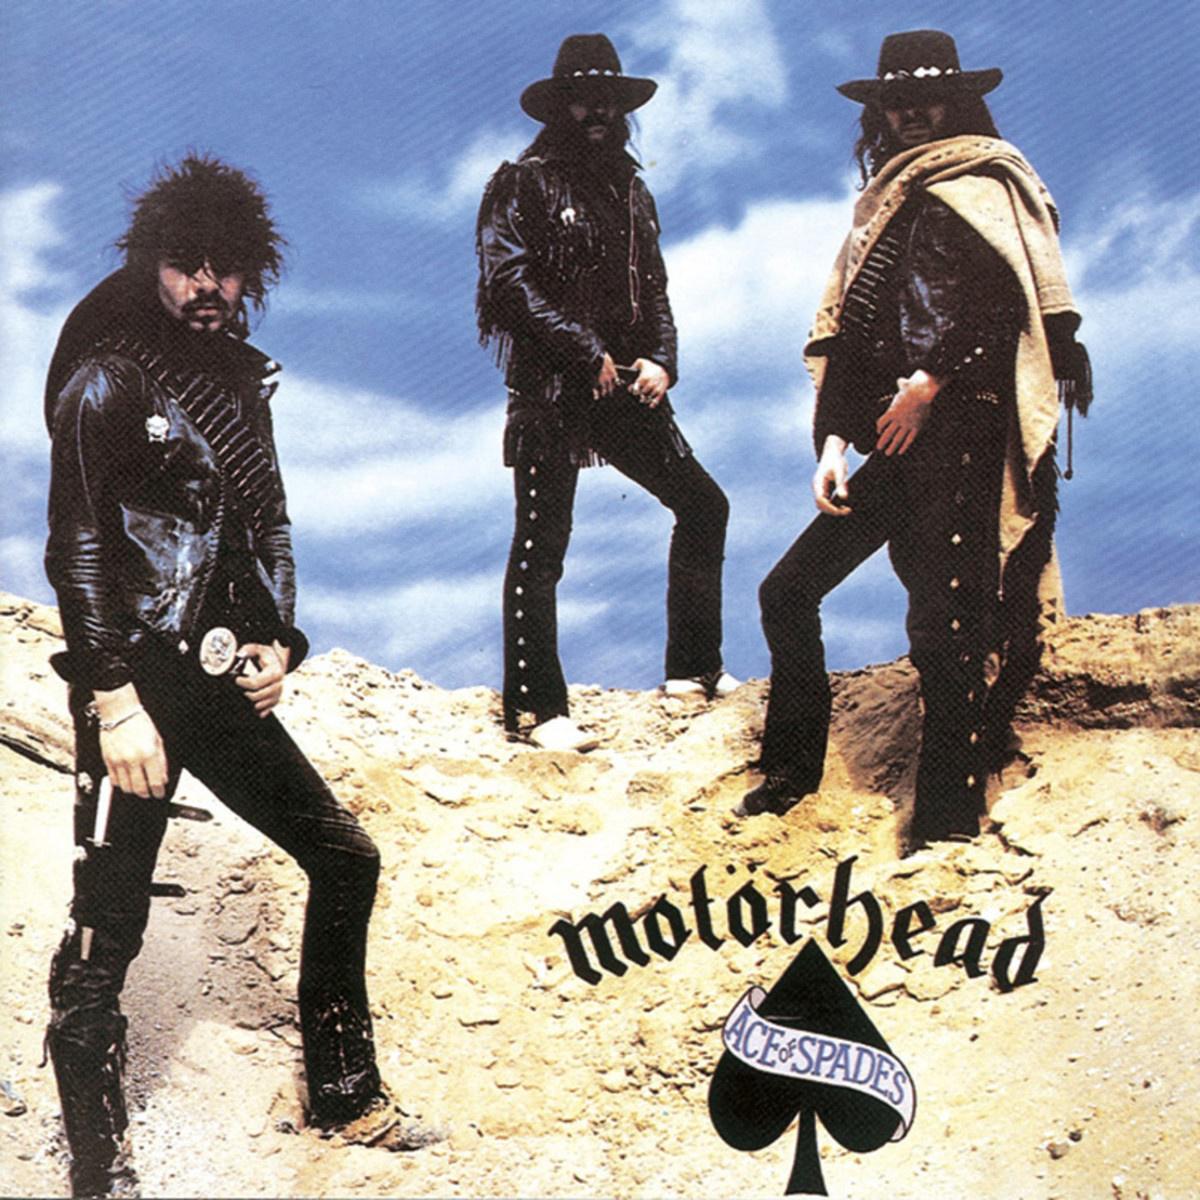 Shoot You in the Back歌词 歌手Motörhead-专辑Ace of Spades-单曲《Shoot You in the Back》LRC歌词下载